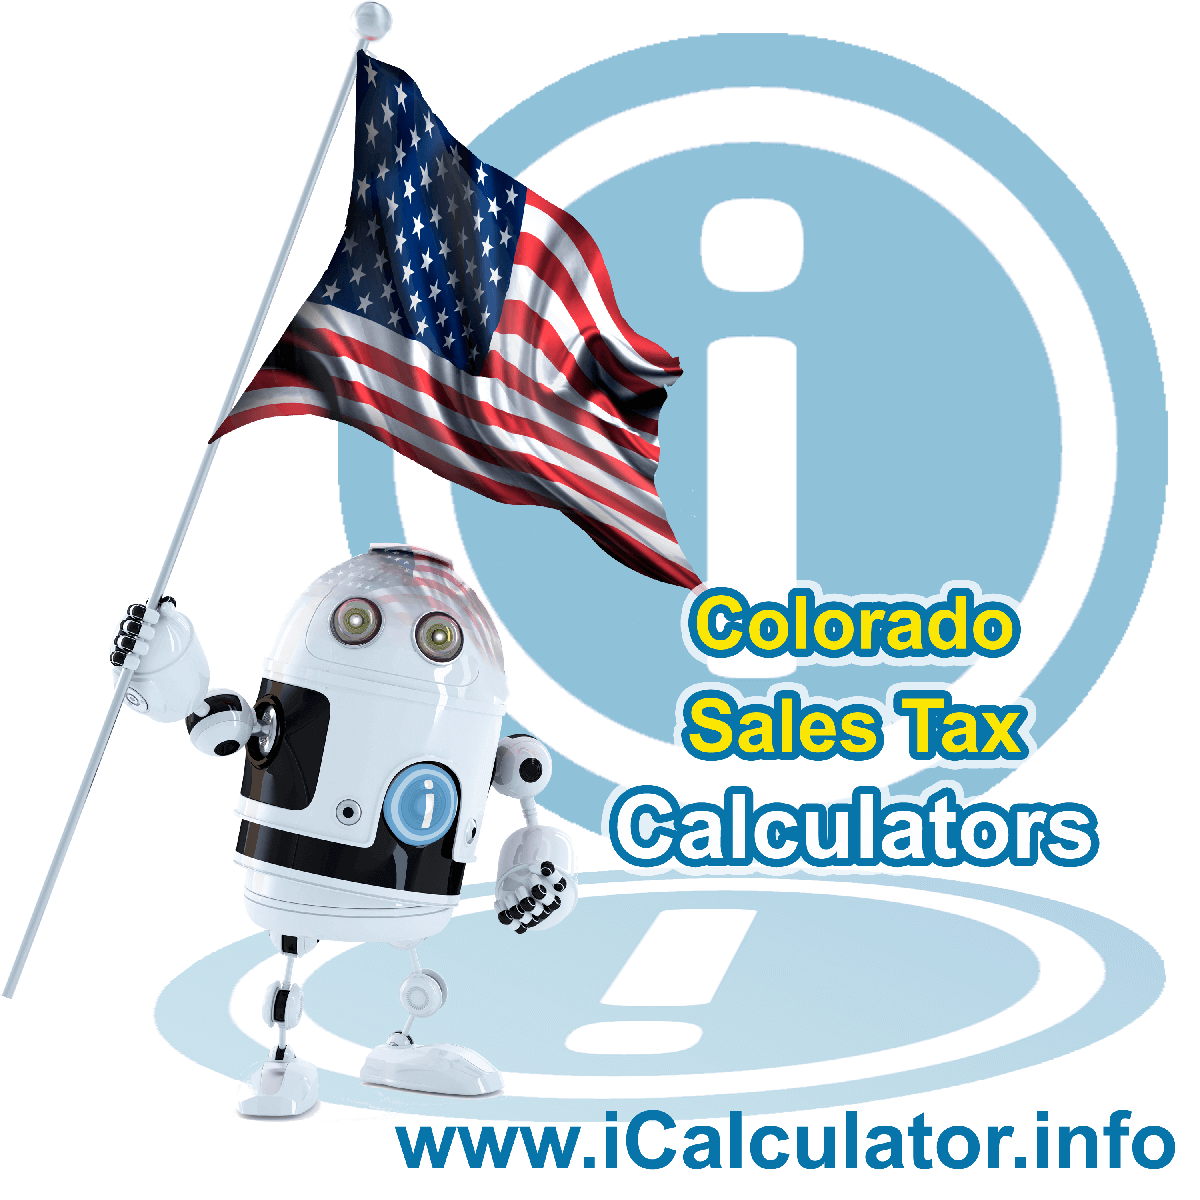 Central Sales Rates: This image illustrates a calculator robot calculating Central sales tax manually using the Central Sales Tax Formula. You can use this information to calculate Central Sales Tax manually or use the Central Sales Tax Calculator to calculate sales tax online.